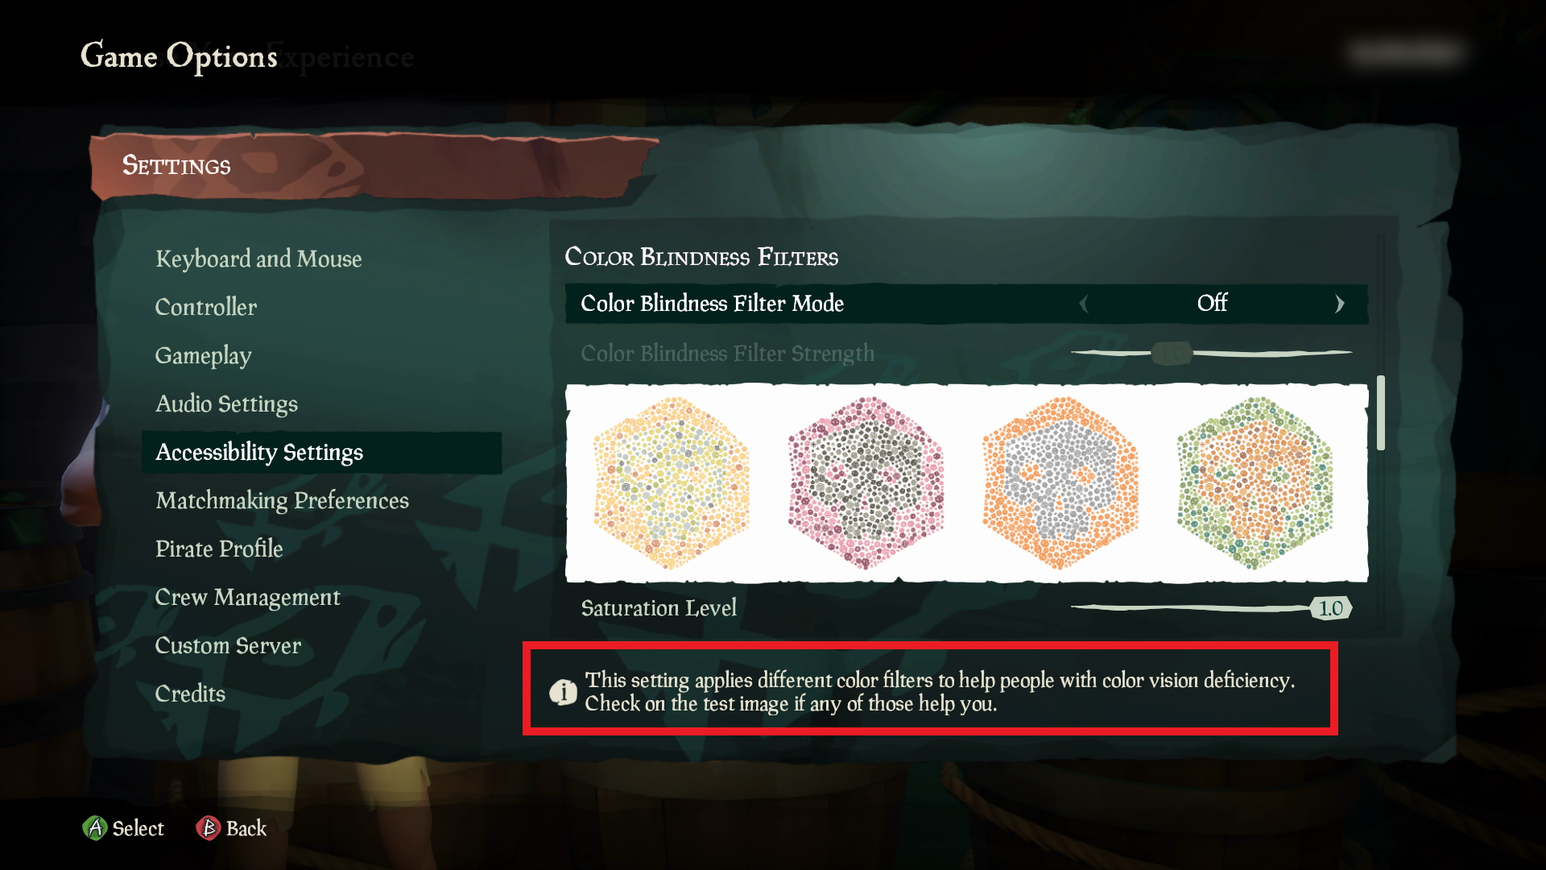 Sea of Thieves Accessibility Settings menu. The menu background is light turquoise with a dark turquoise fish pattern. The menu text is white with a darker background behind it so that it's distinguishable from the background.